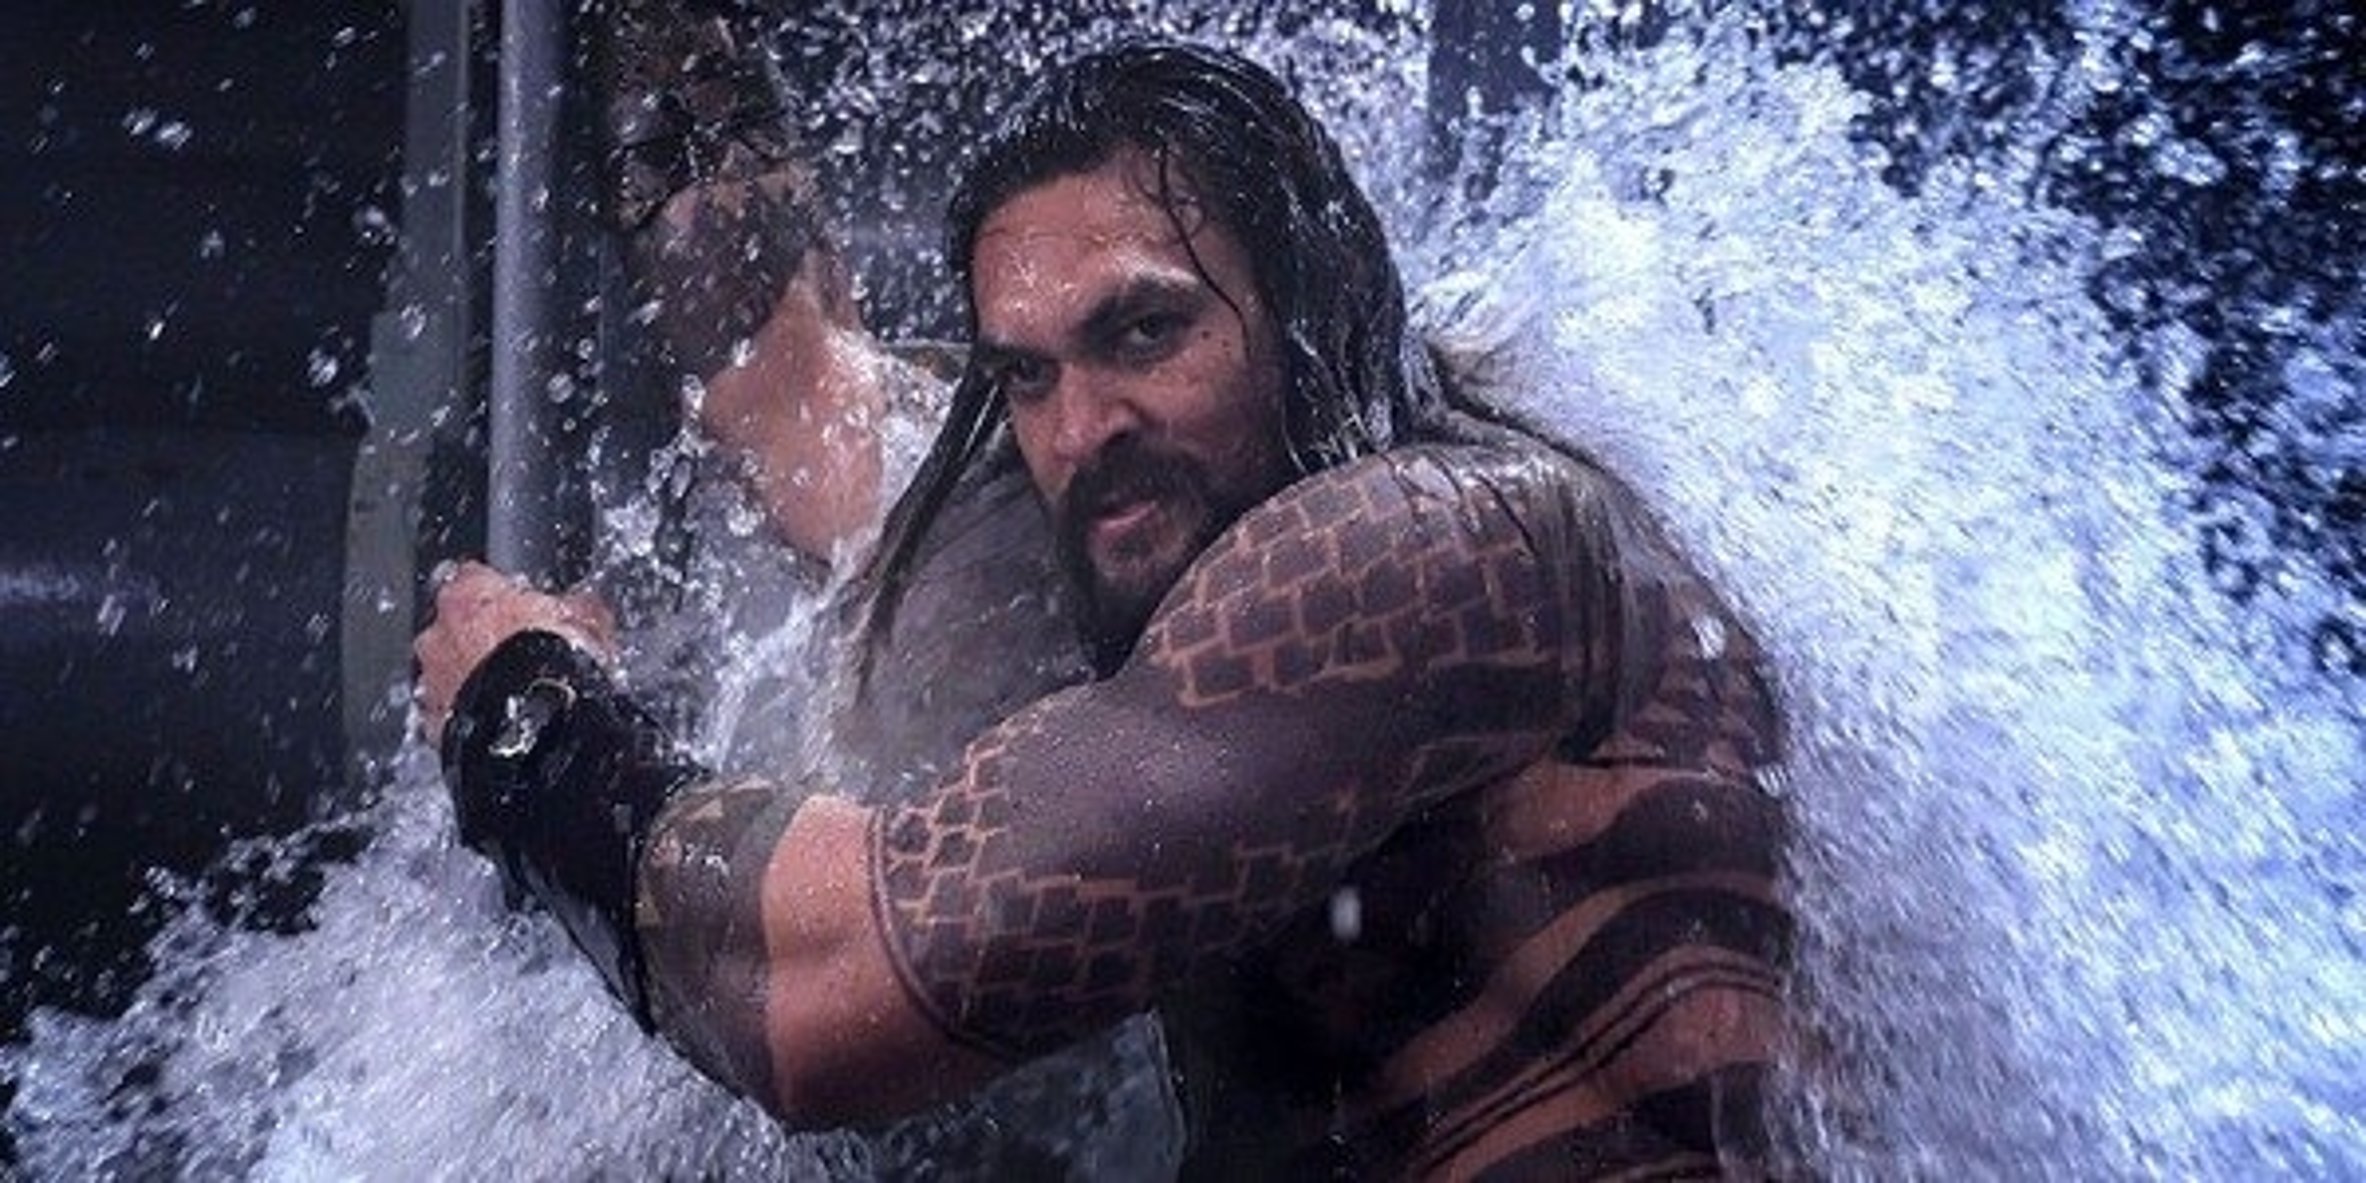 The Beautiful Way Jason Mamoa Surprised a Young Aquaman Fan With Cancer